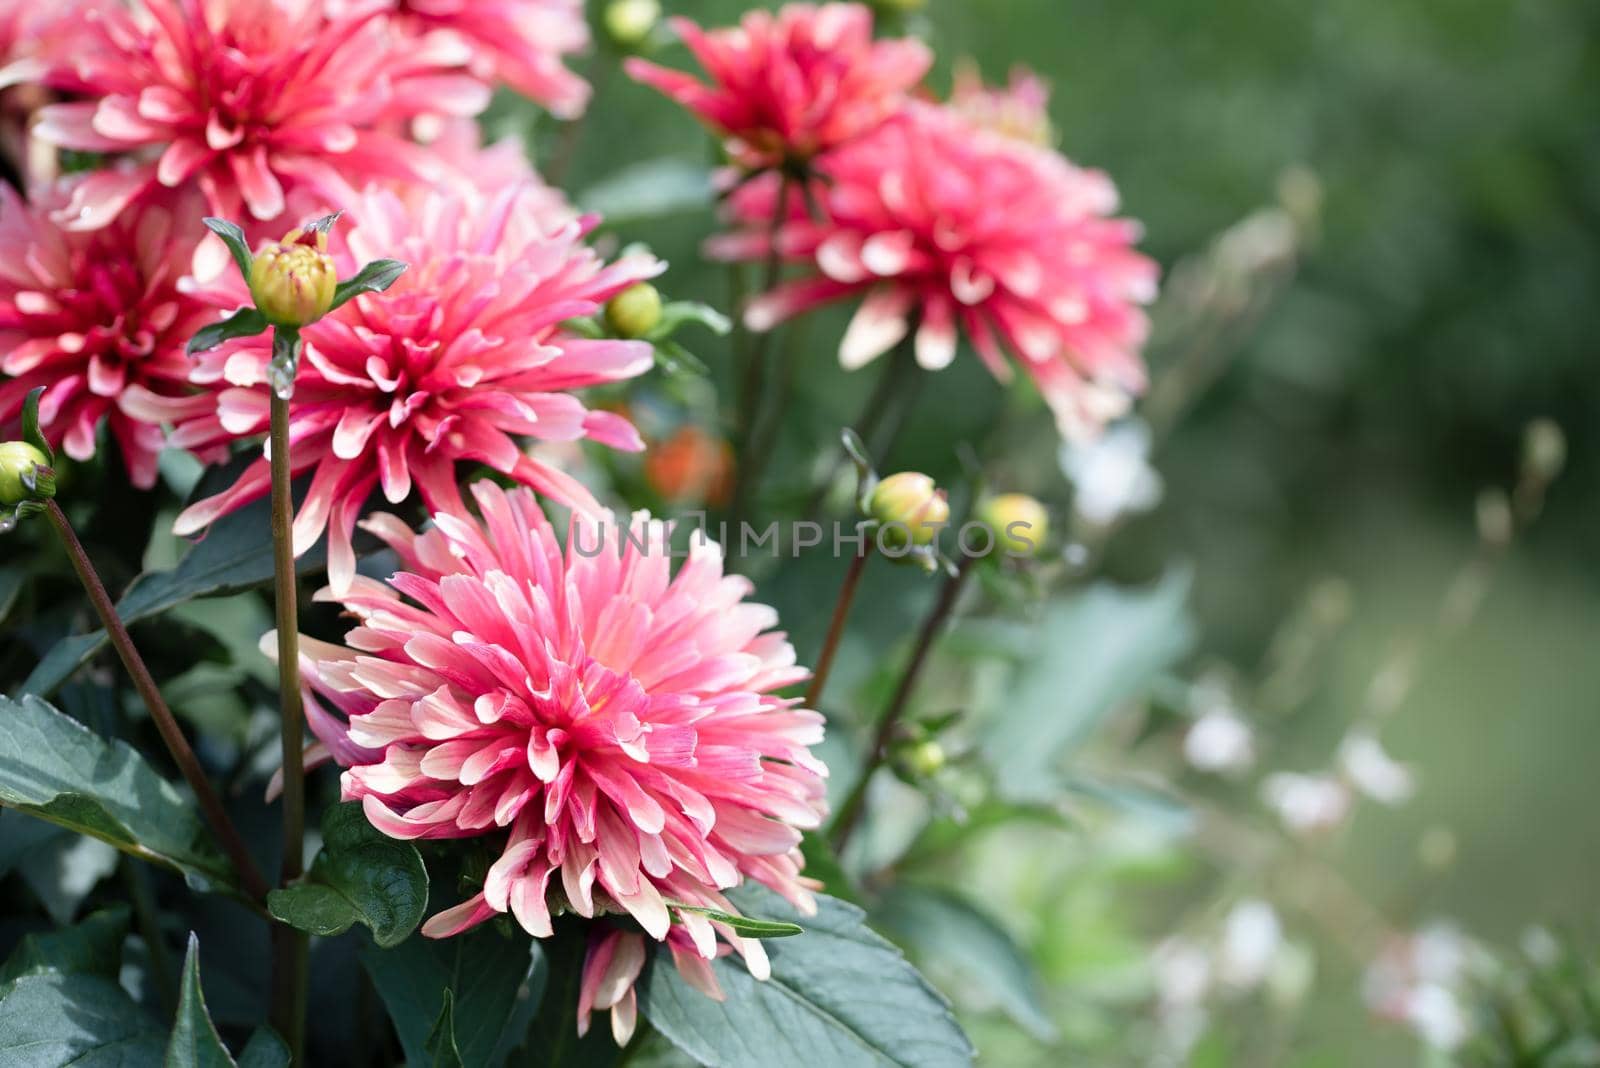 Pink red chrysanthemum flowers close up photo by Estival